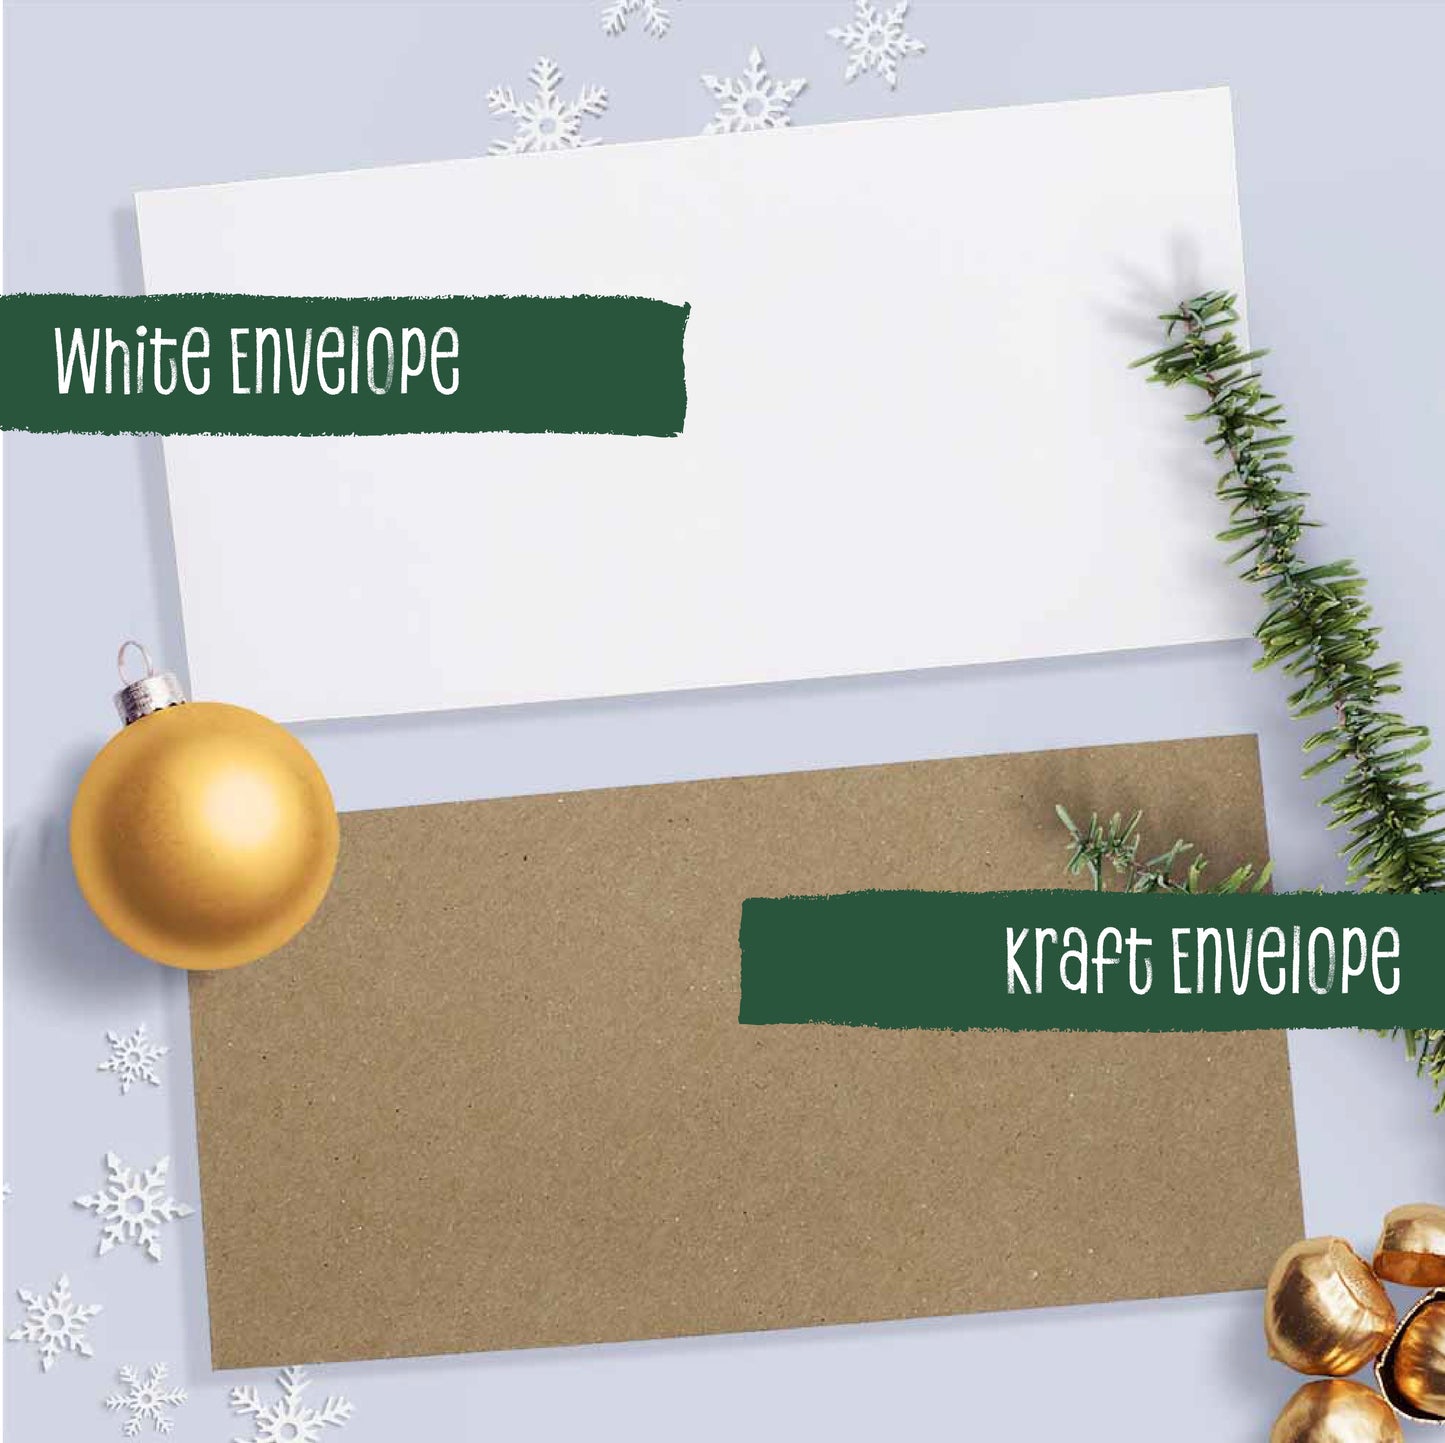 Santa Greeting Cards “Frohe Weihnachten” With Envelopes (Set of 10)